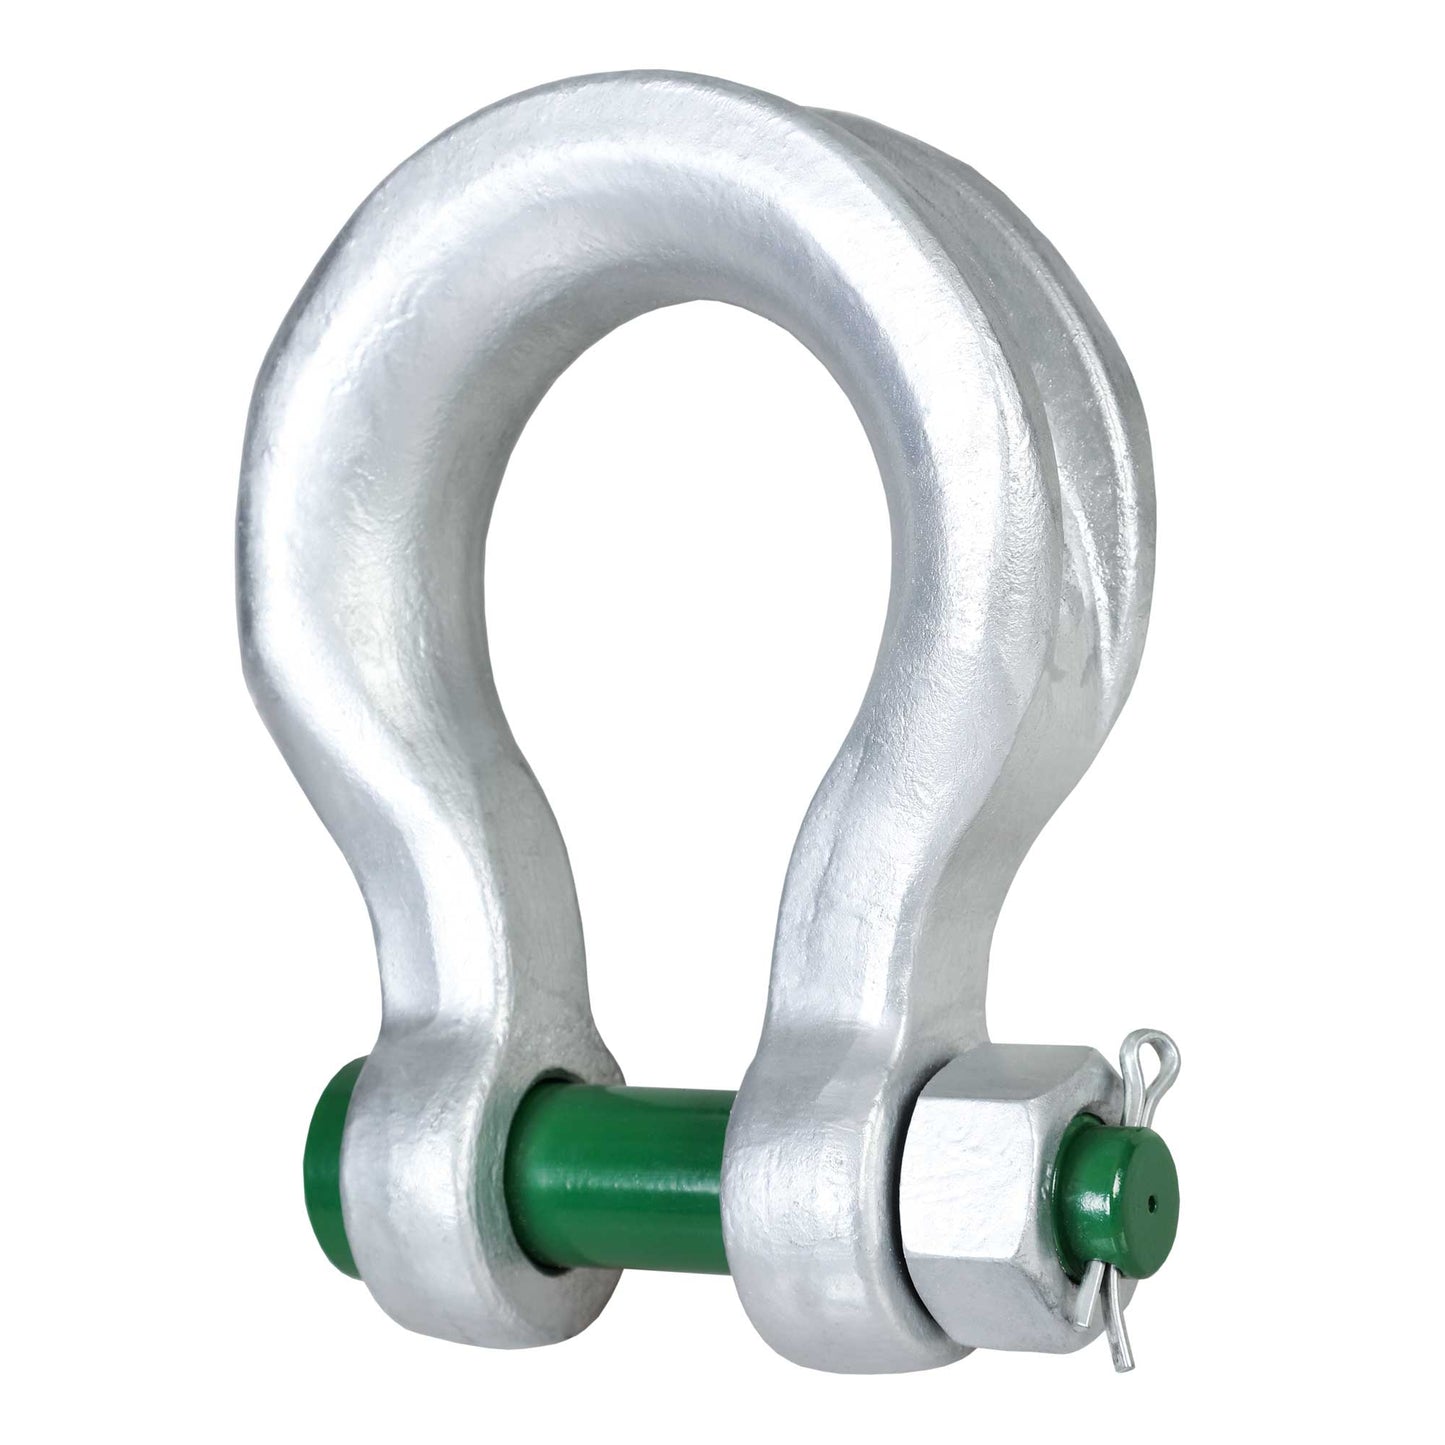 Van Beest Green Pin Bolt Type Wide Body Sling Shackle | P-6033 - 30 Ton primary image